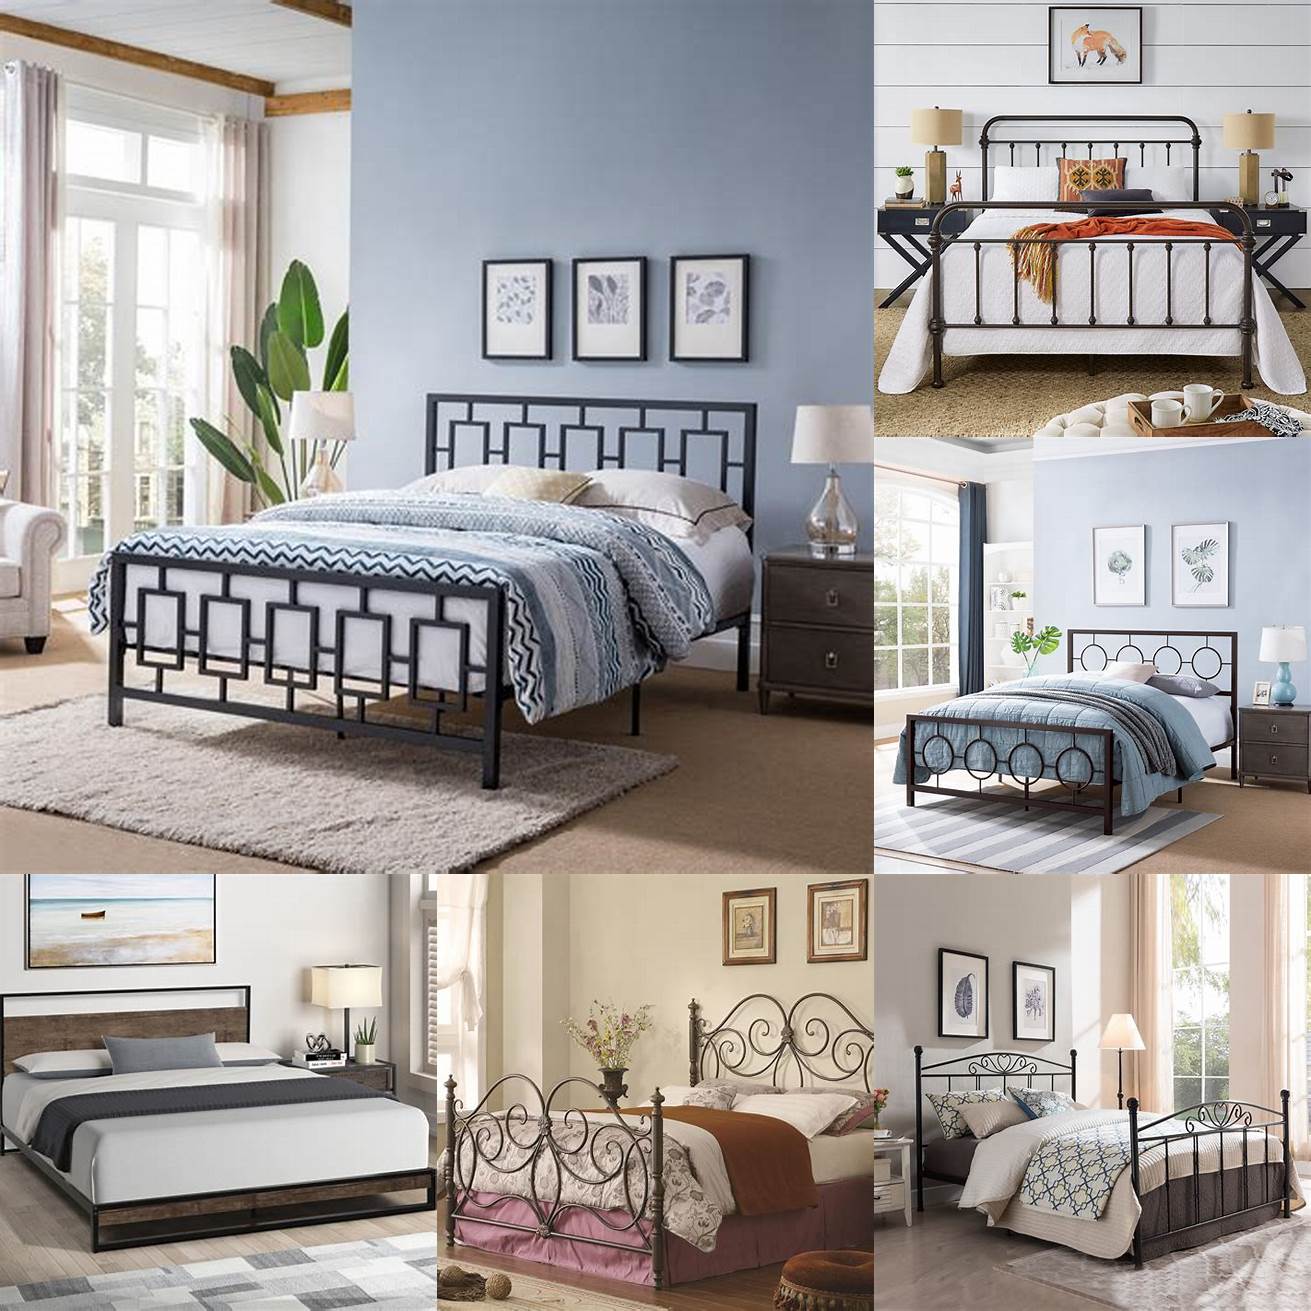 Platform iron bed frame queen with neutral bedding and geometric decor